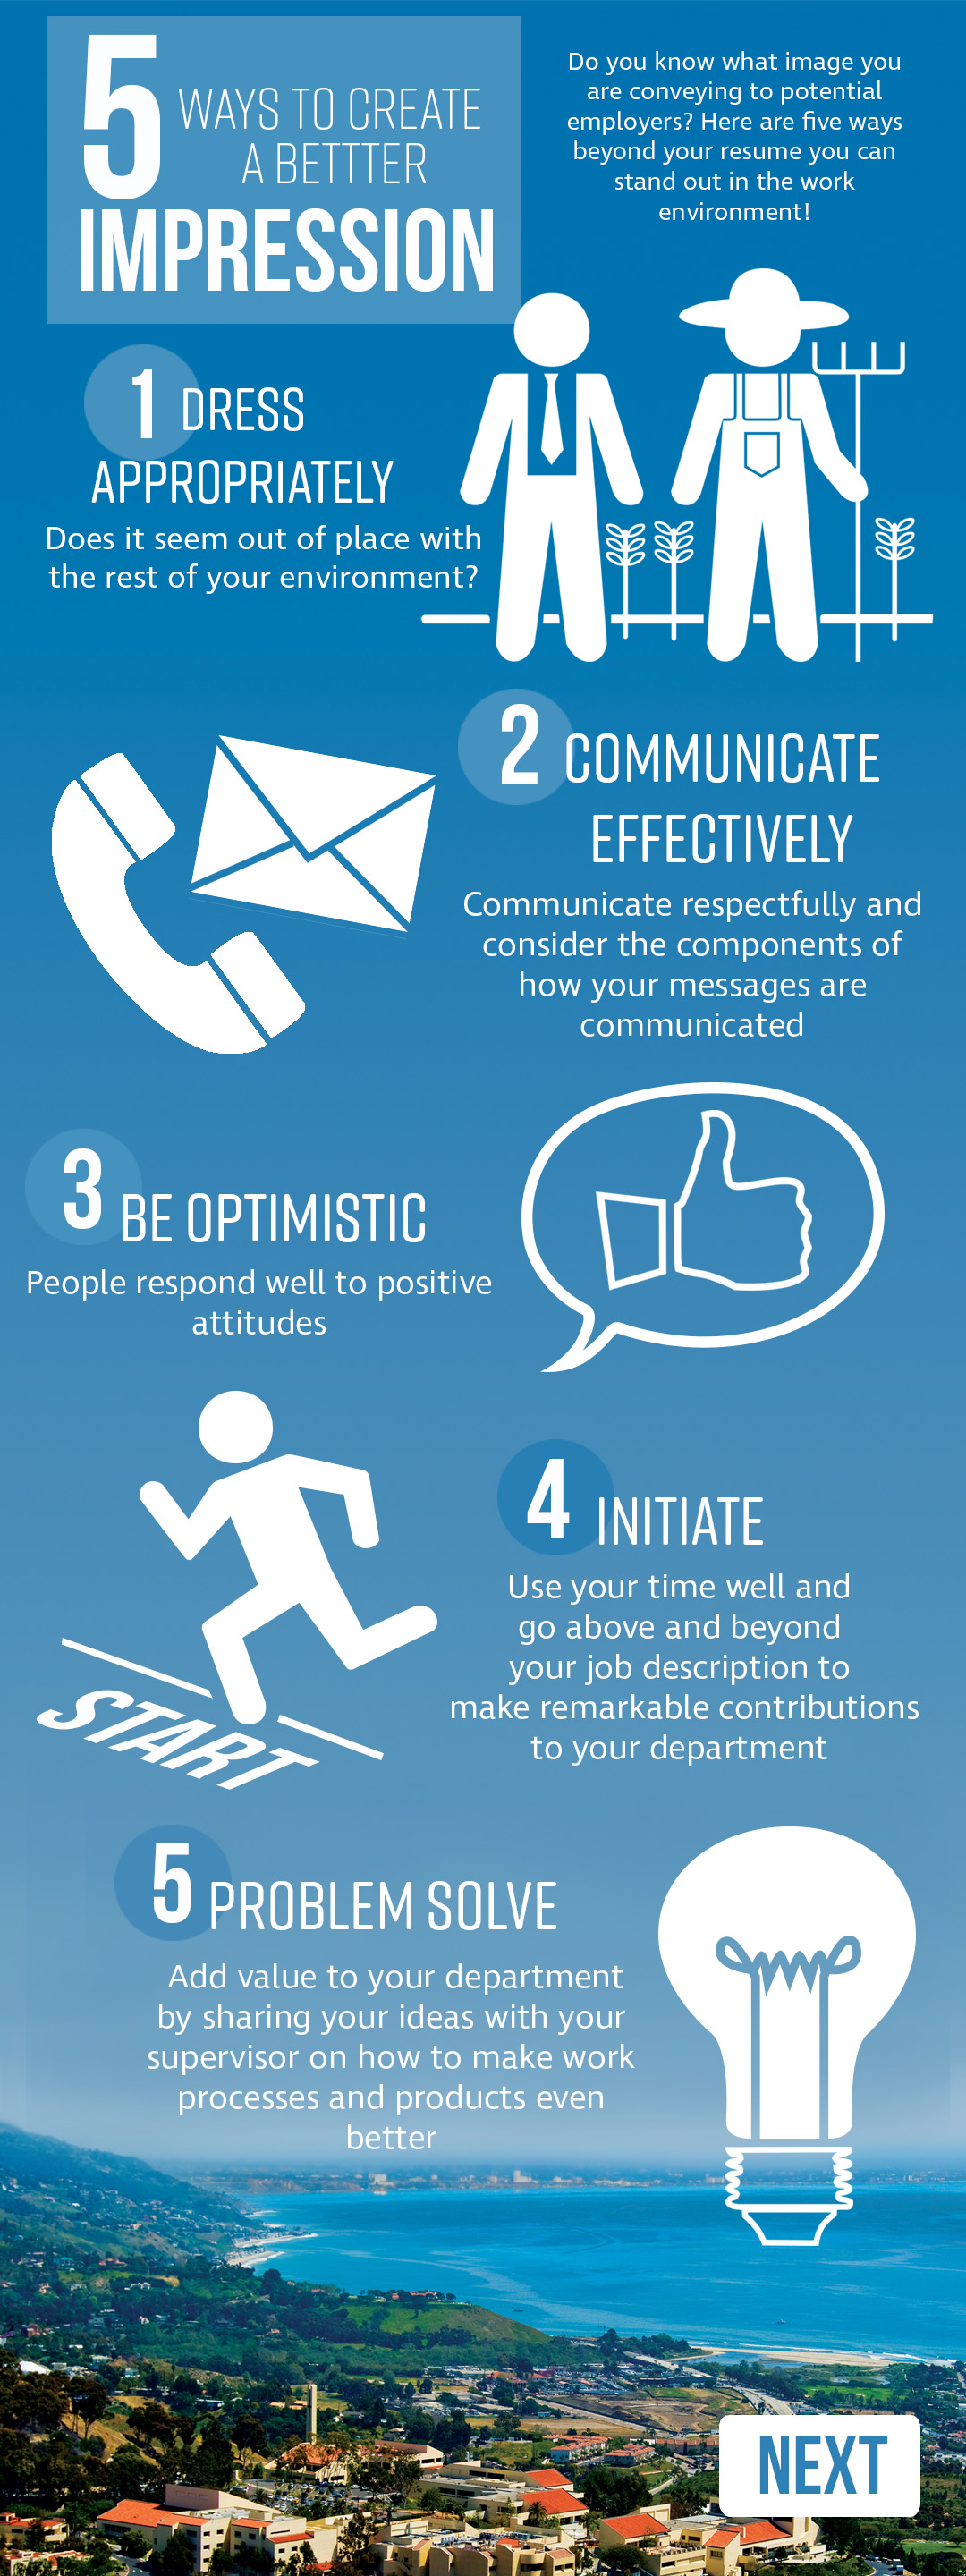 Better Impression Infographic